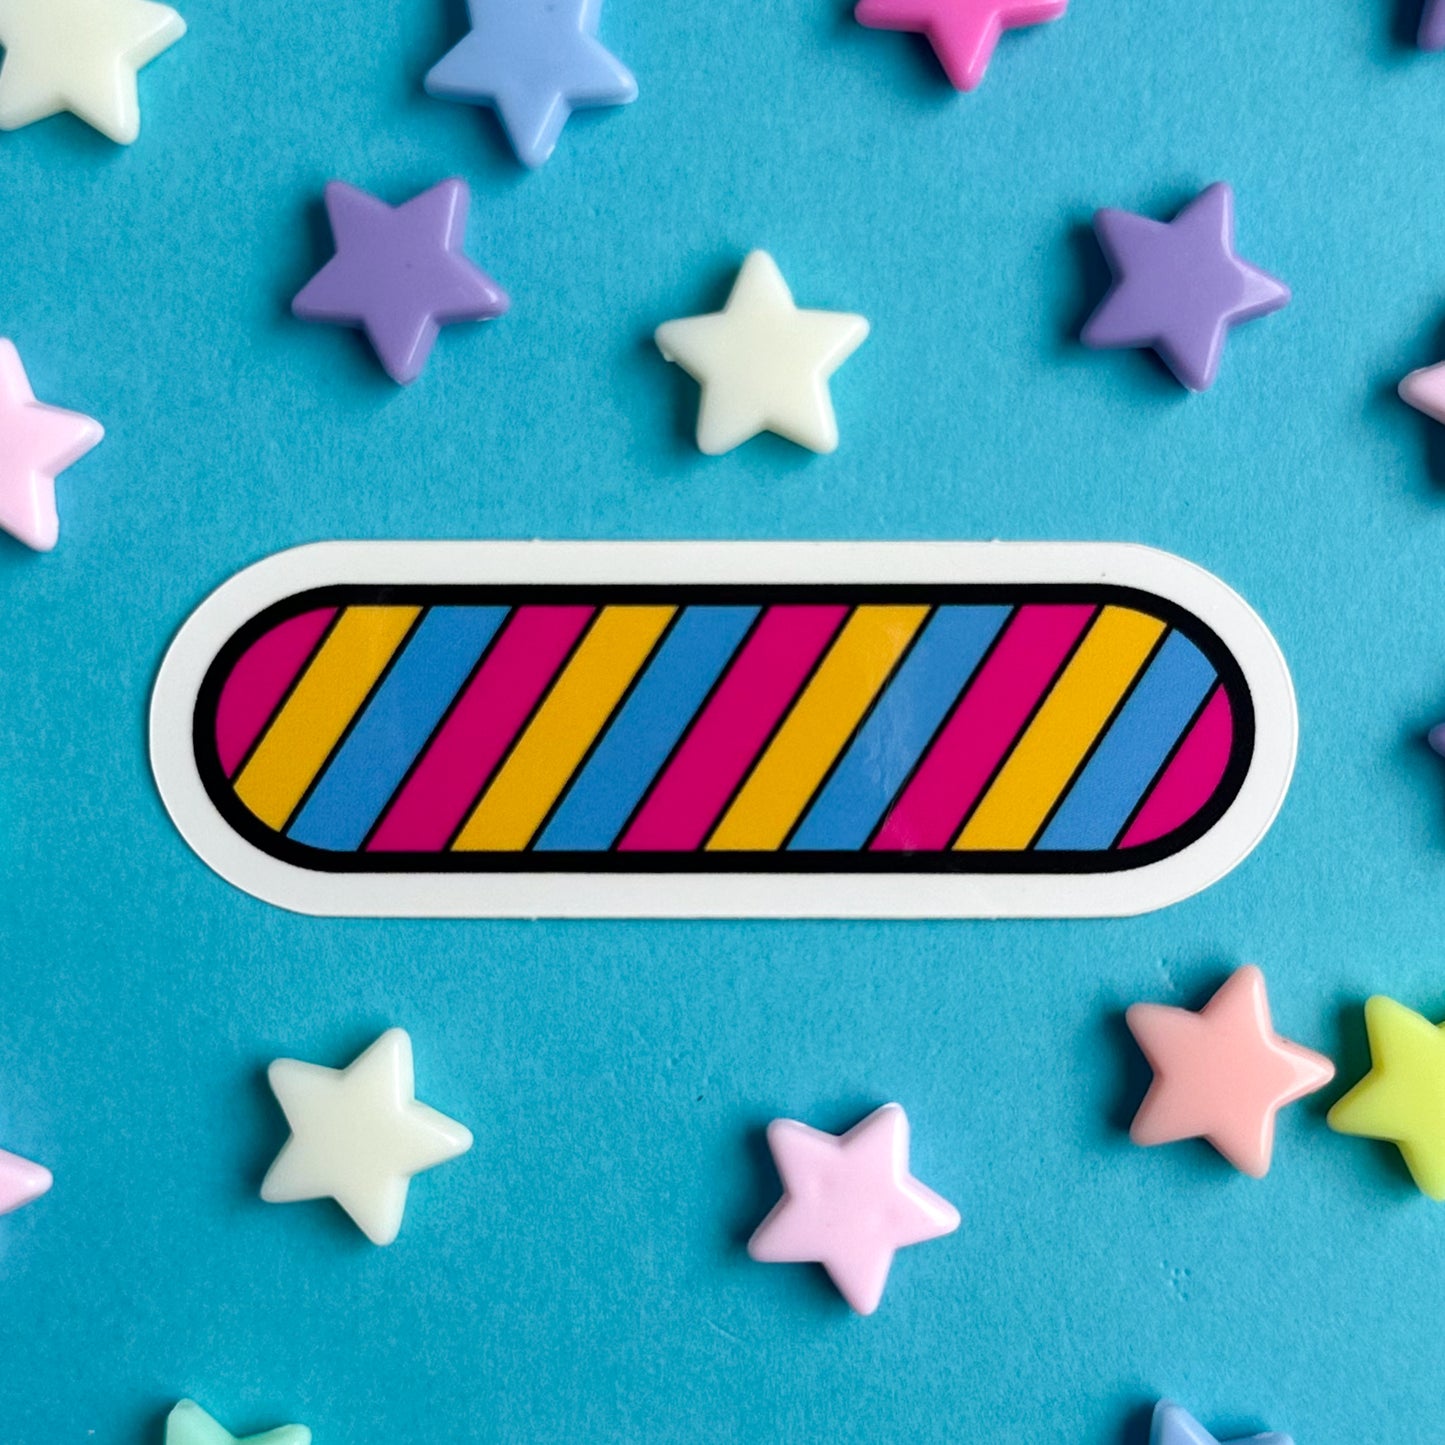 A vinyl sticker shaped like an oval with diagonal stripes of the Pansexual pride flag. The sticker is on a blue background with pastel star beads around it.